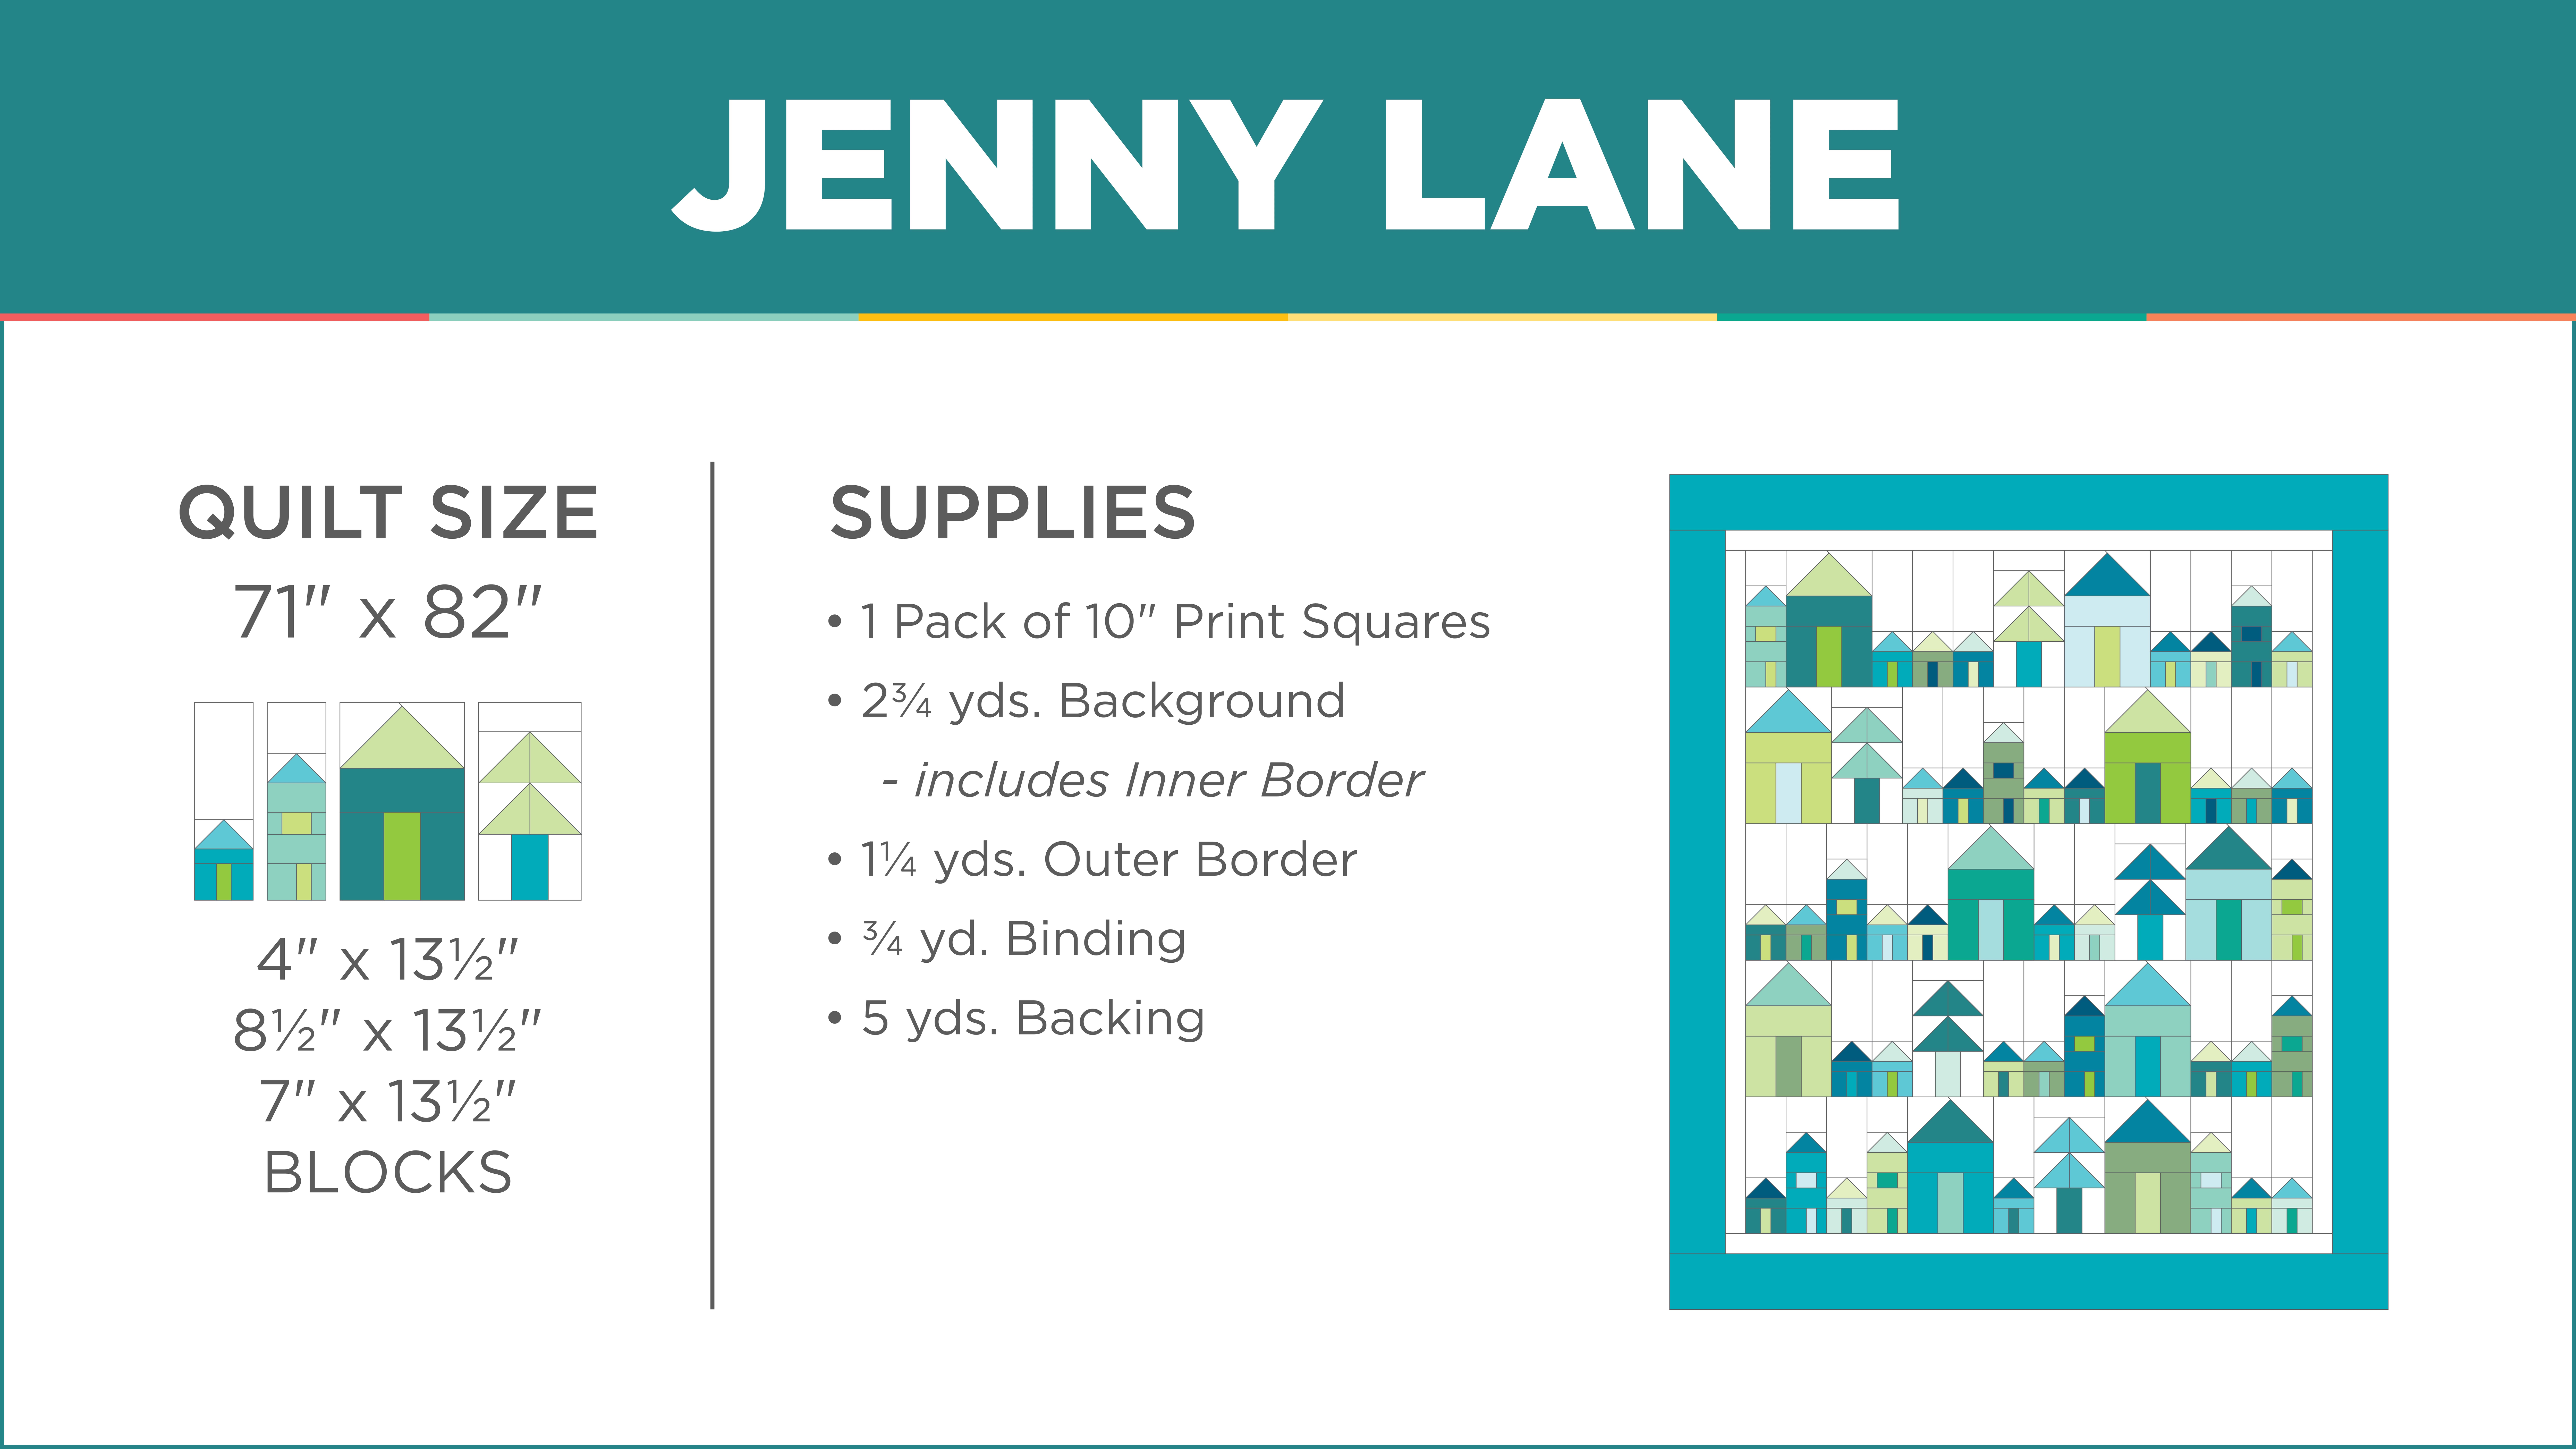 The Jenny Lane quilt from Missouri Star Quilt Co.